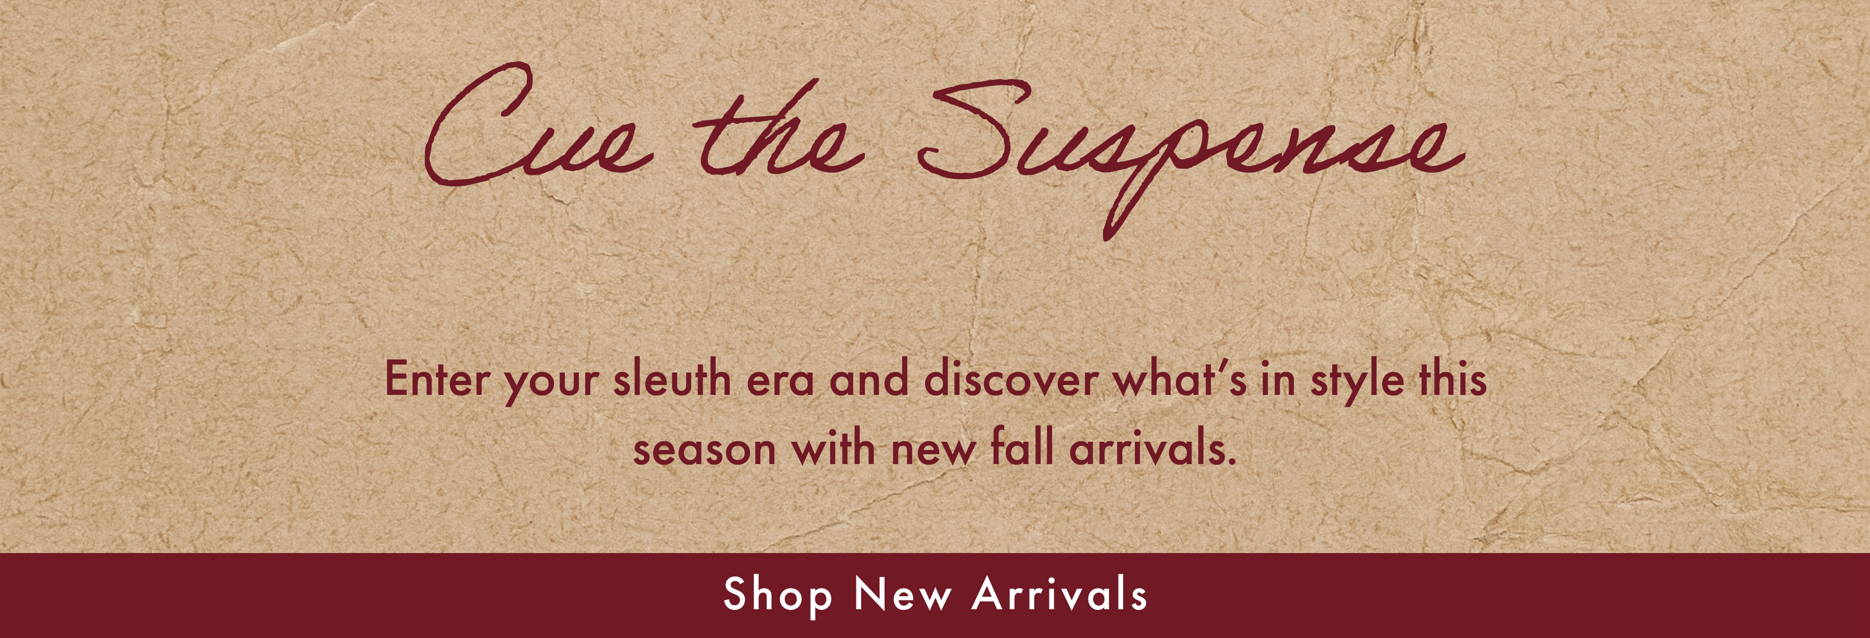 Cue the Suspense - Enter your sleuth era and discover what's in style this season with new fall arrivals. SHOP NEW ARRIVALS